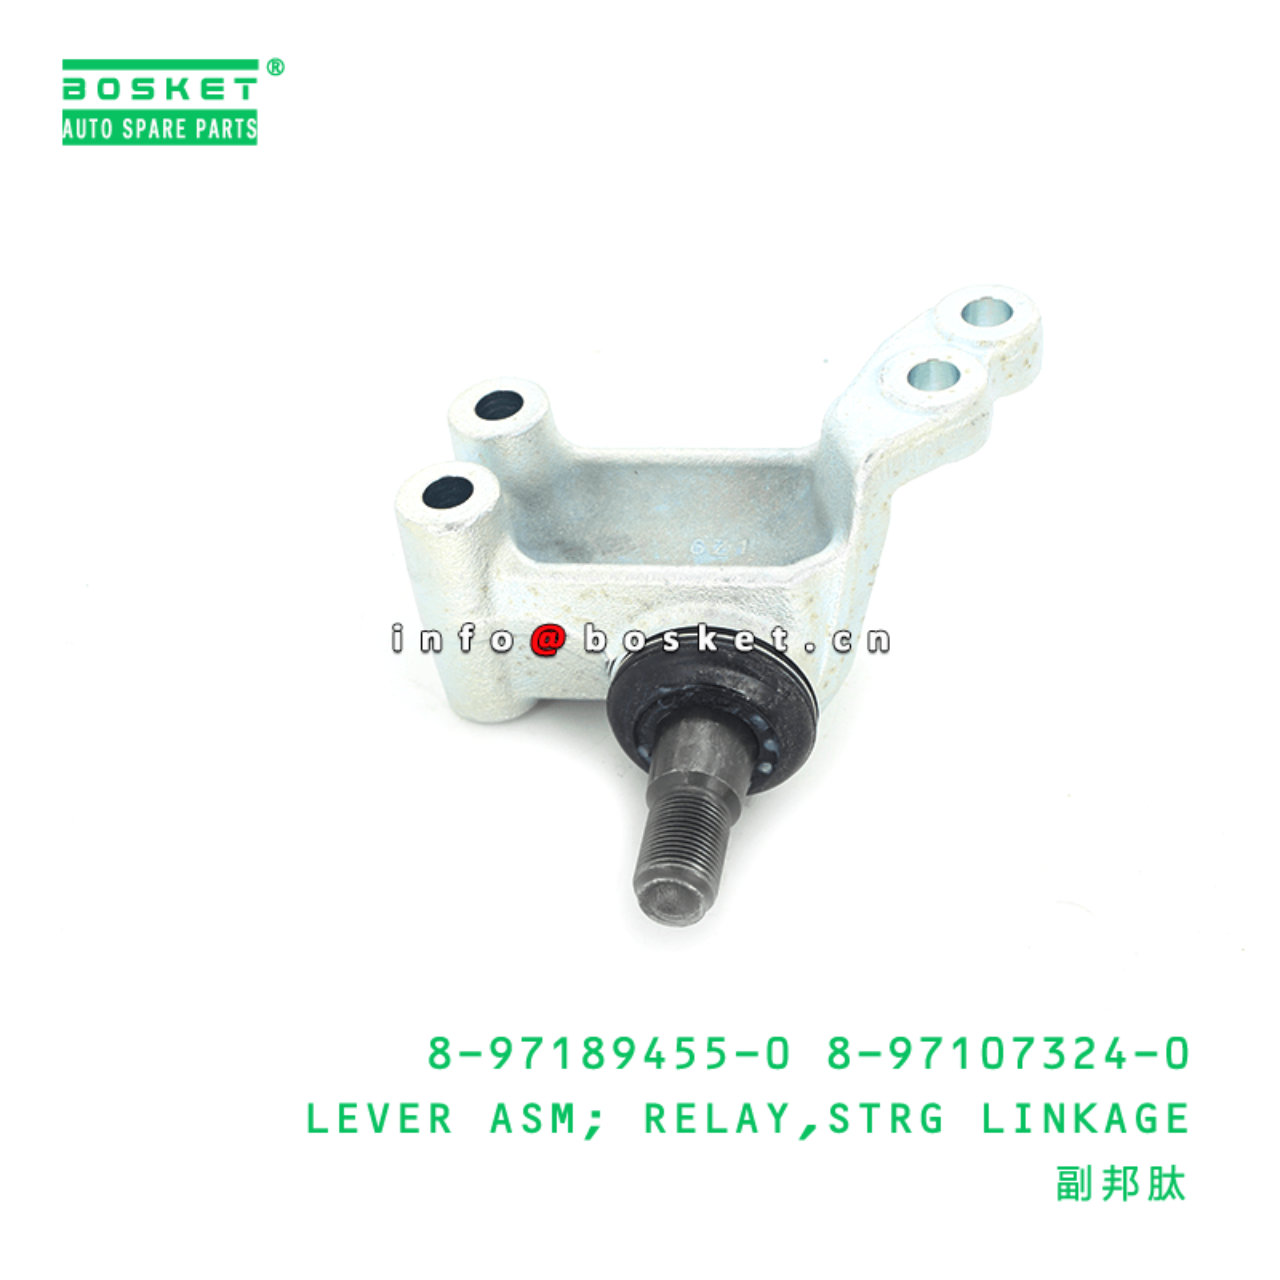 8-97189455-0 8-97107324-0 Strung Linkage Relay Lever Assembly Suitable for ISUZU NKR55 4JB1